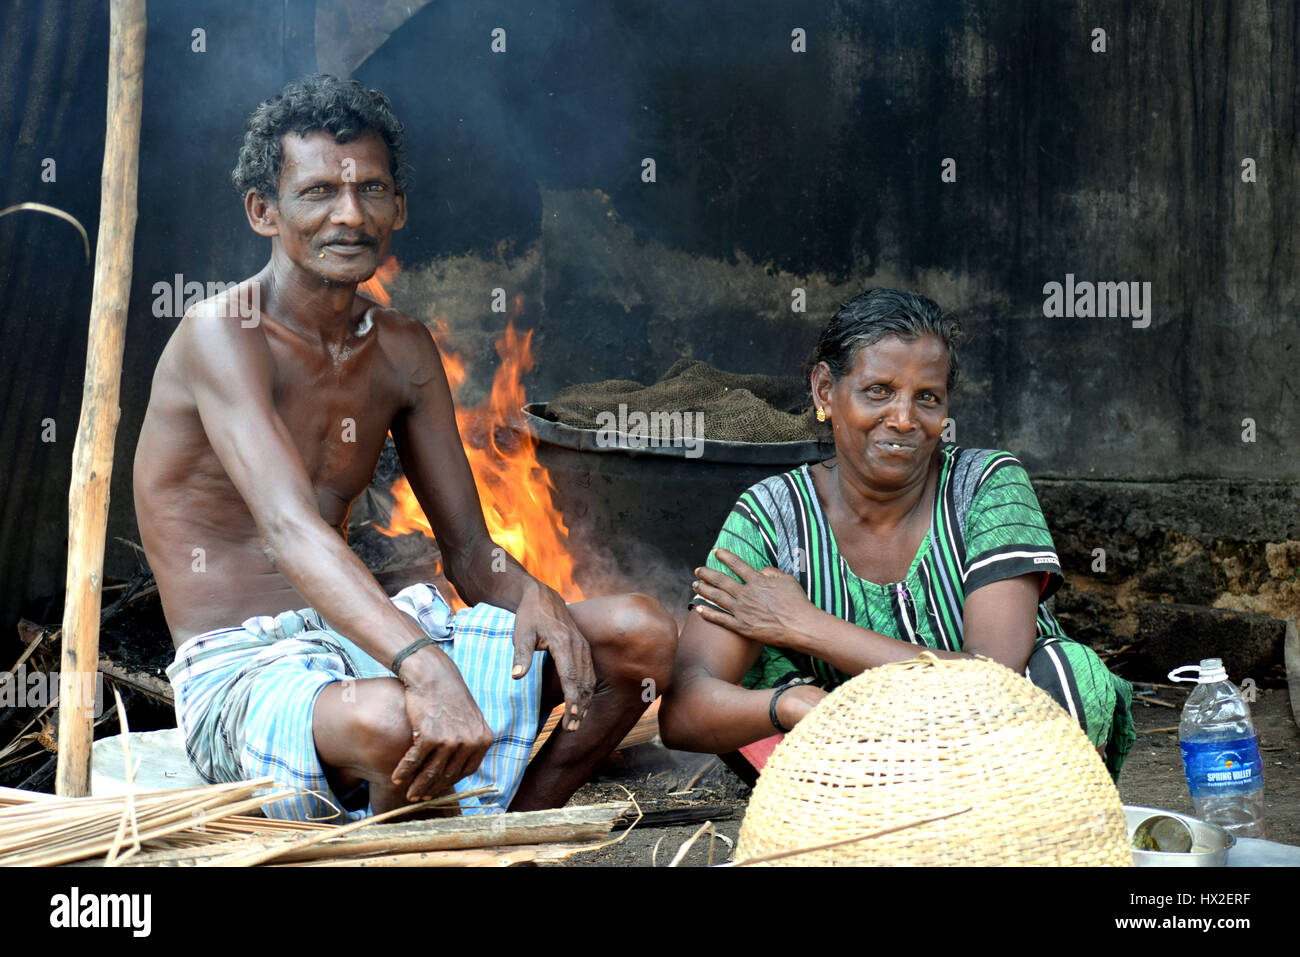 fisherman and his wife from Kerala (southern state of India) boiling the oysters they captured for selling Stock Photo